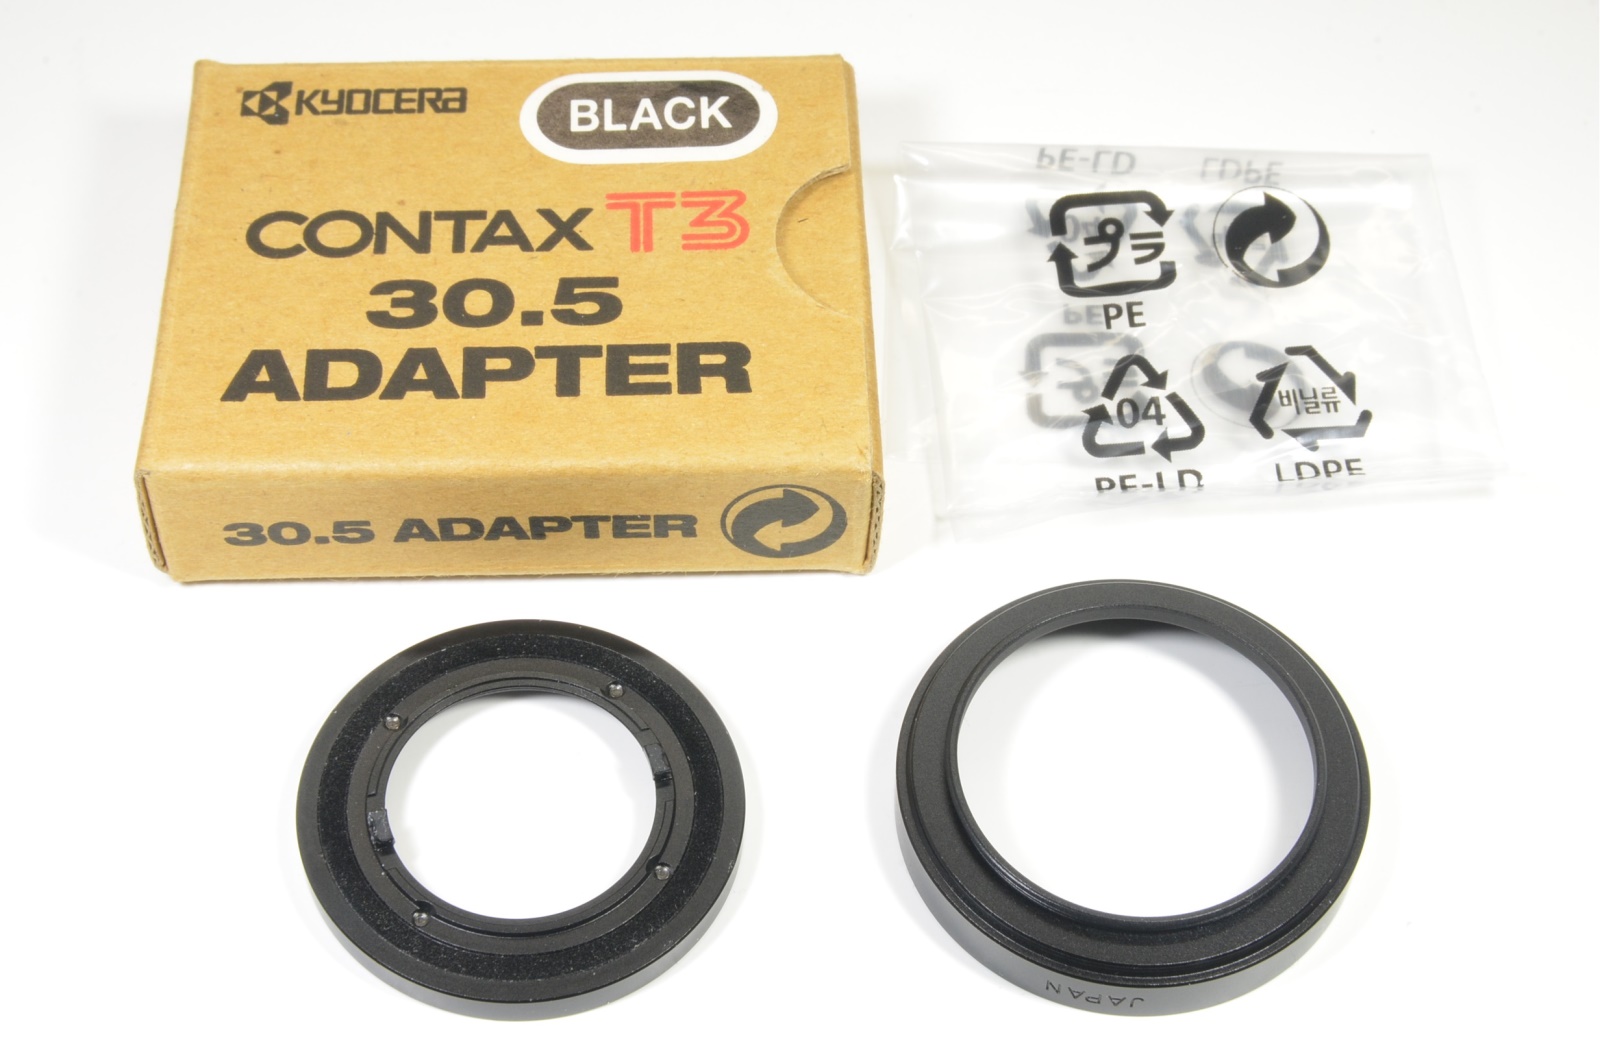 contax t3 30.5 adapter and contax tvsii metal hood black